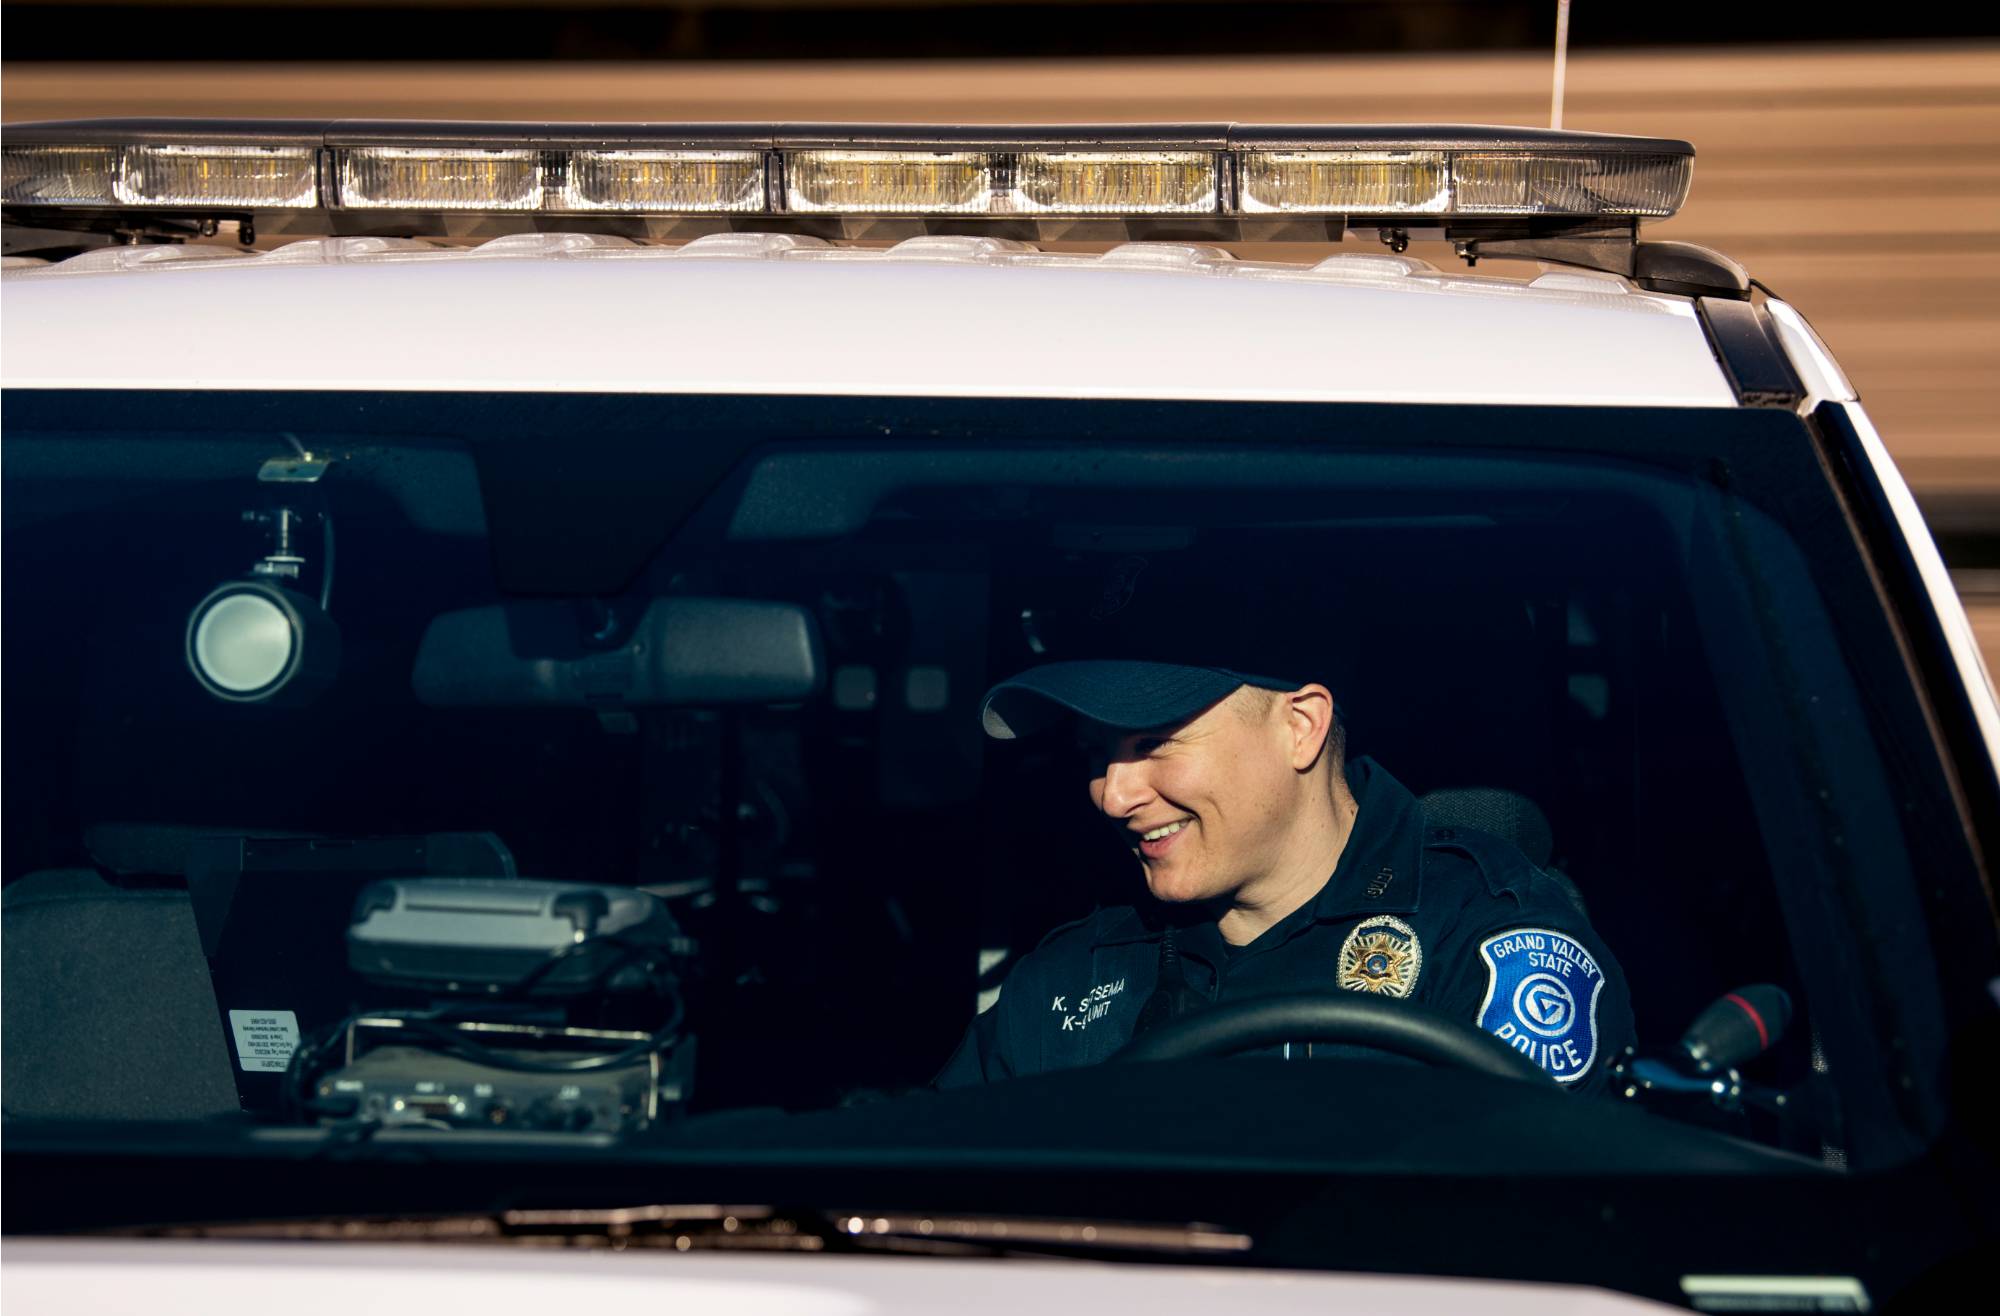 Police officer in front of a cruiser smiling